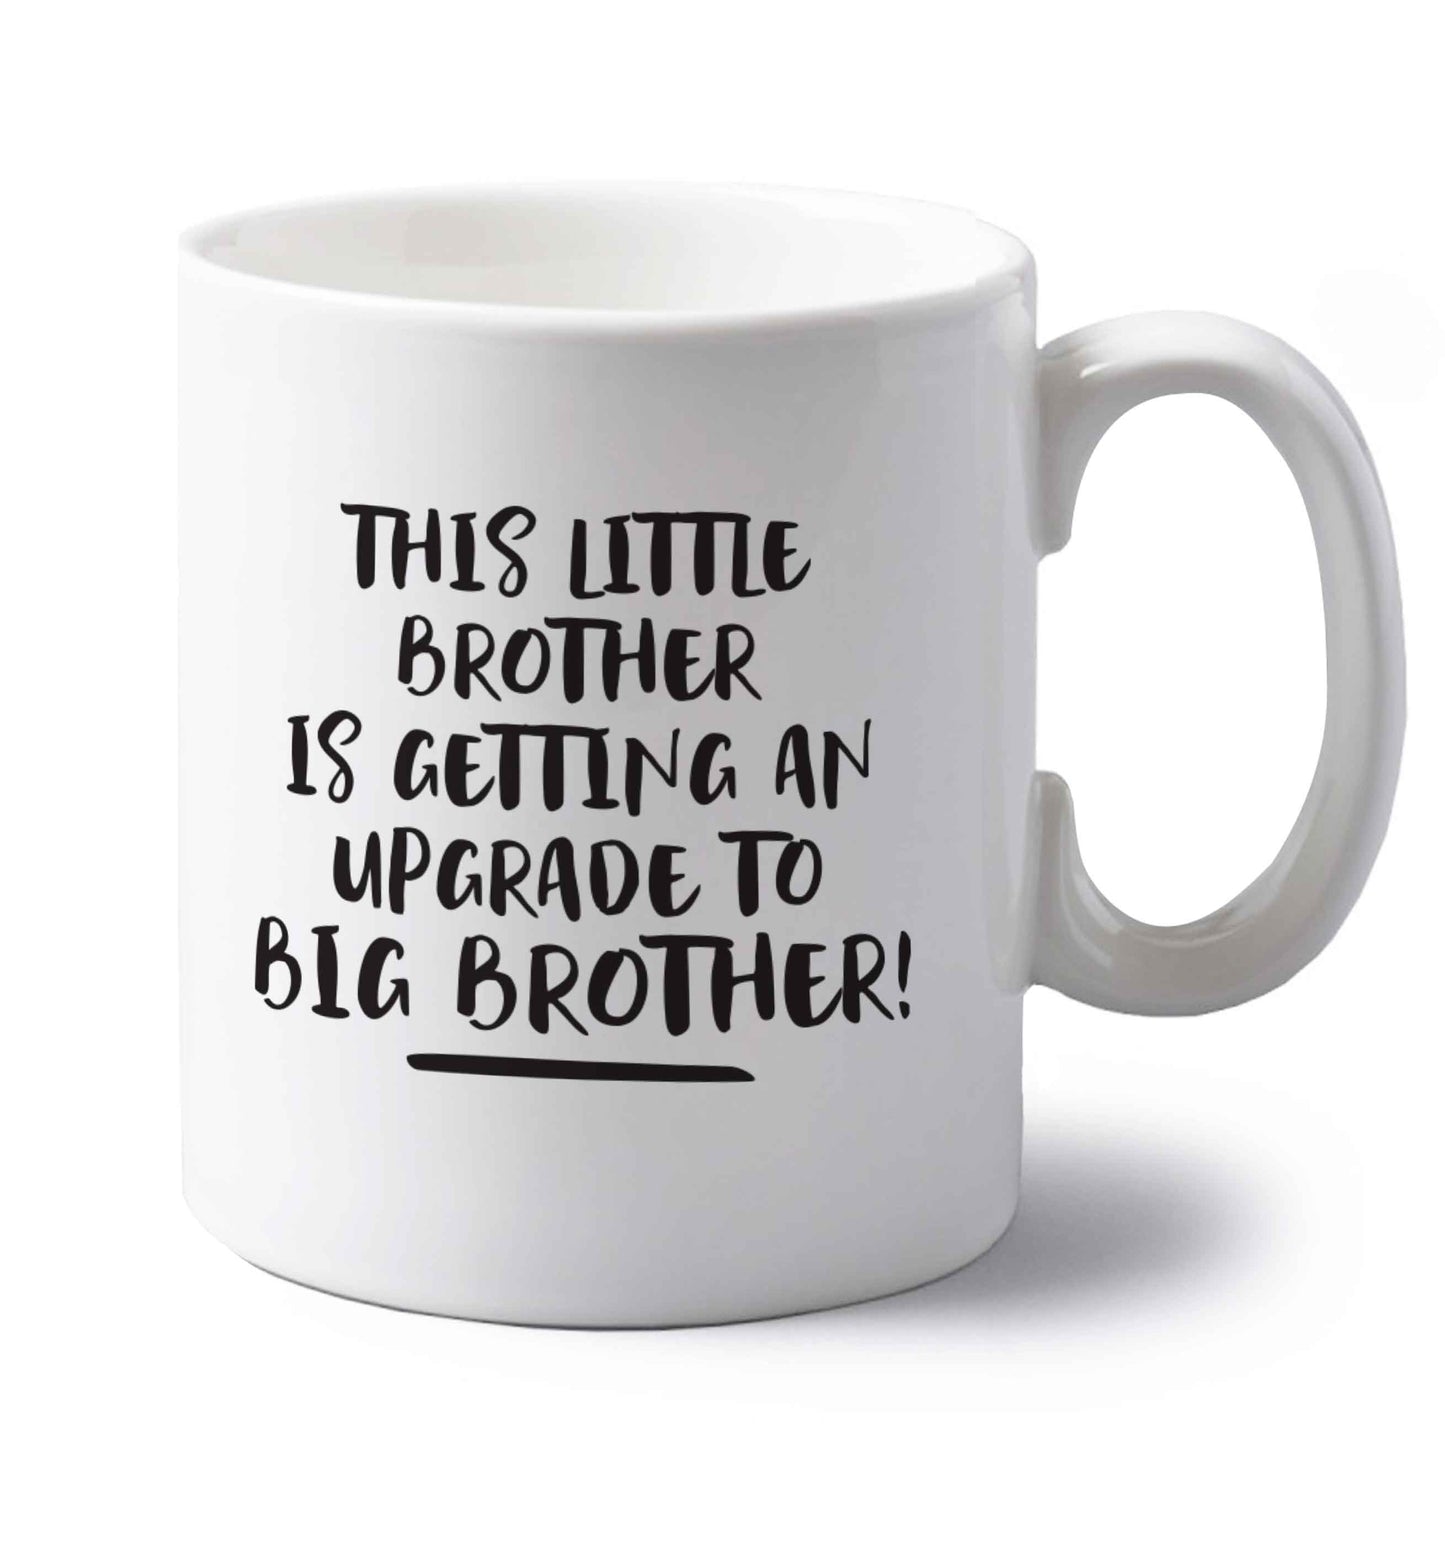 This little brother is getting an upgrade to big brother! left handed white ceramic mug 